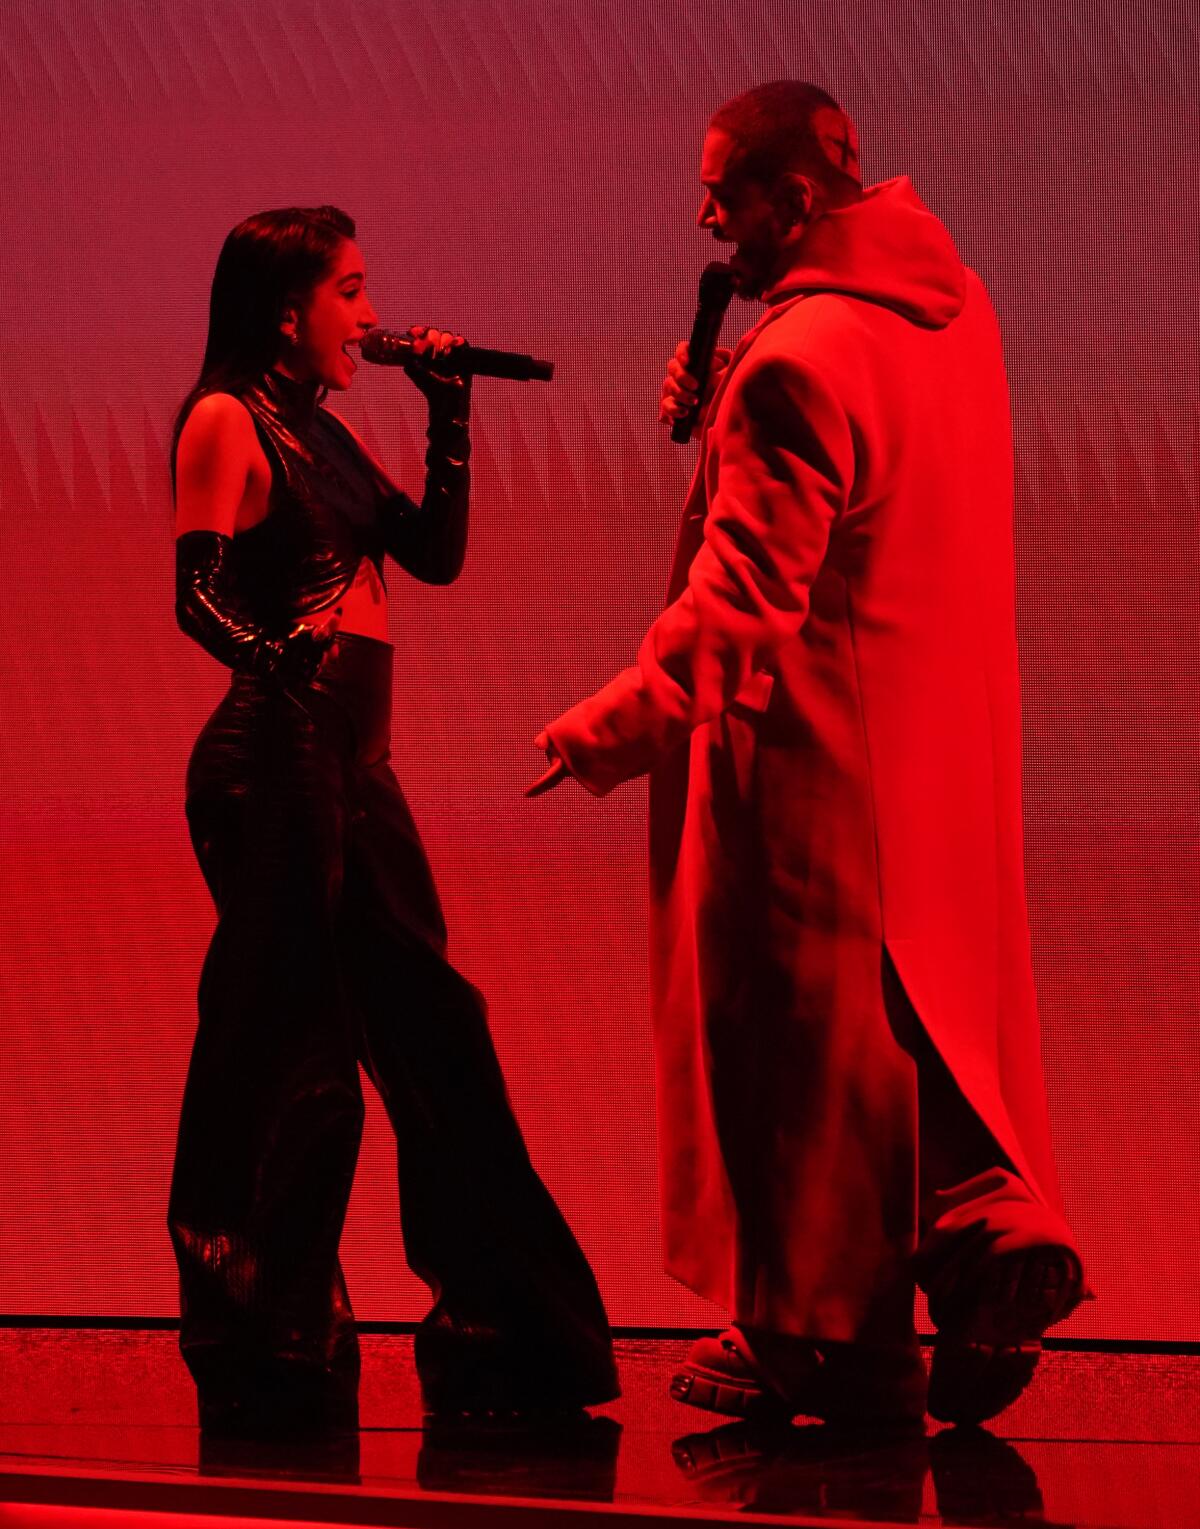 Maria Becerra, left, and J Balvin perform a medley at the 64th Grammy Awards.